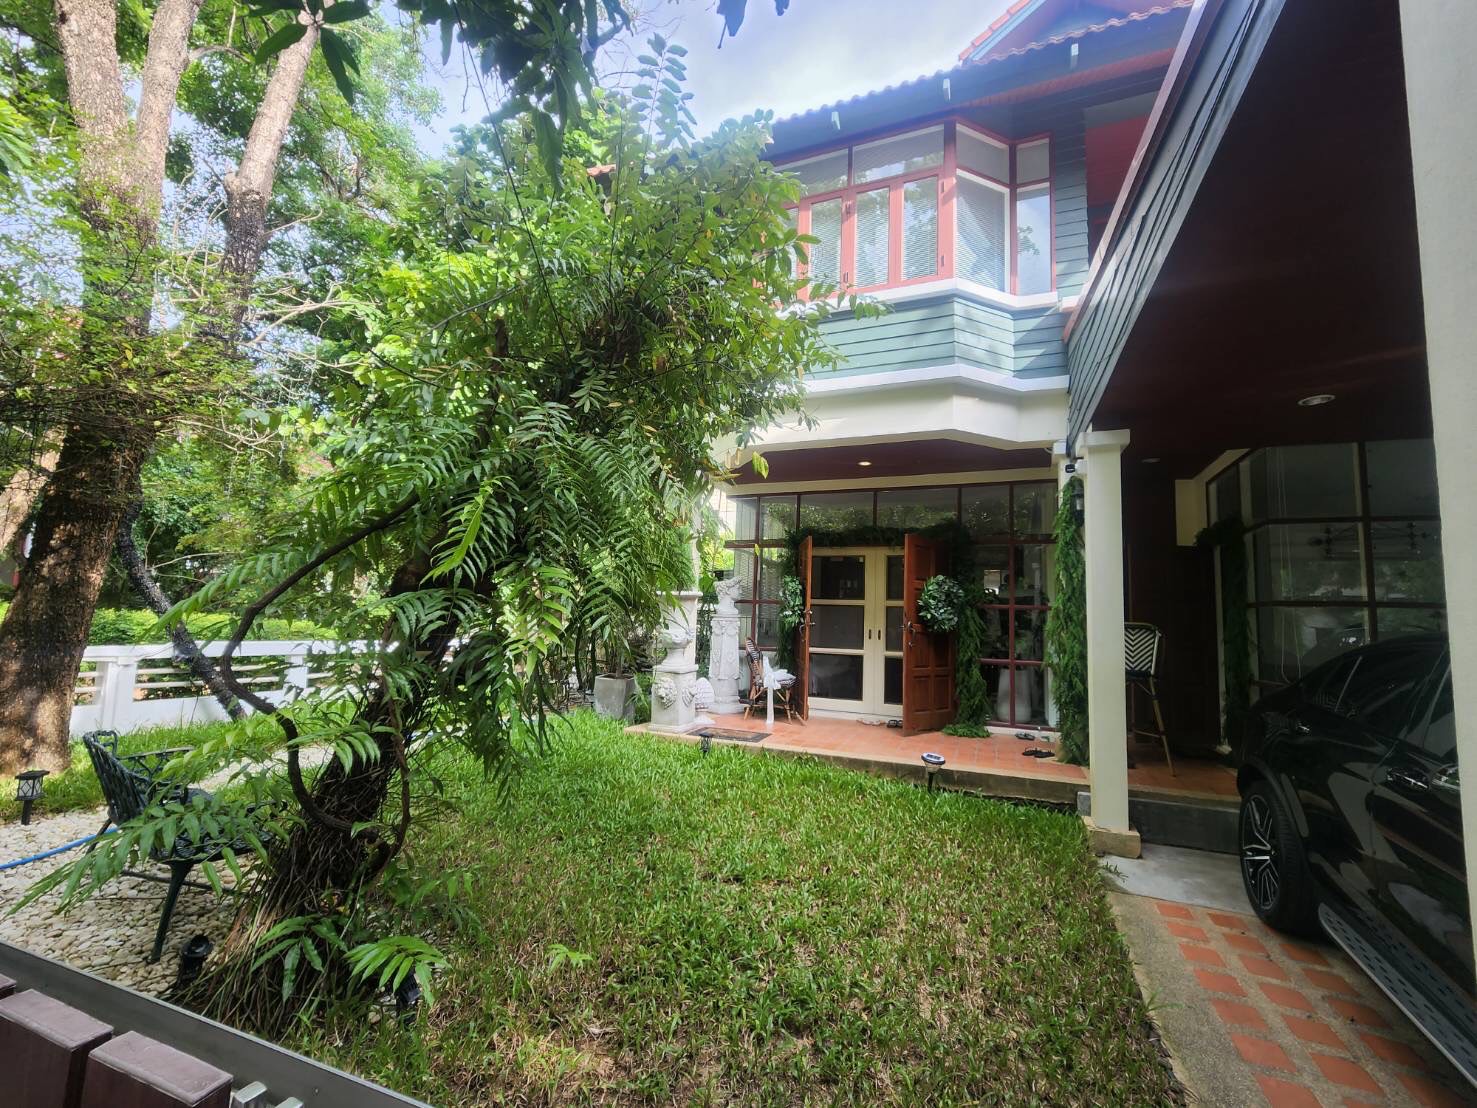 House For sell in Bangkok***Special Price 16,000,000***(Ref. no : 22972 )